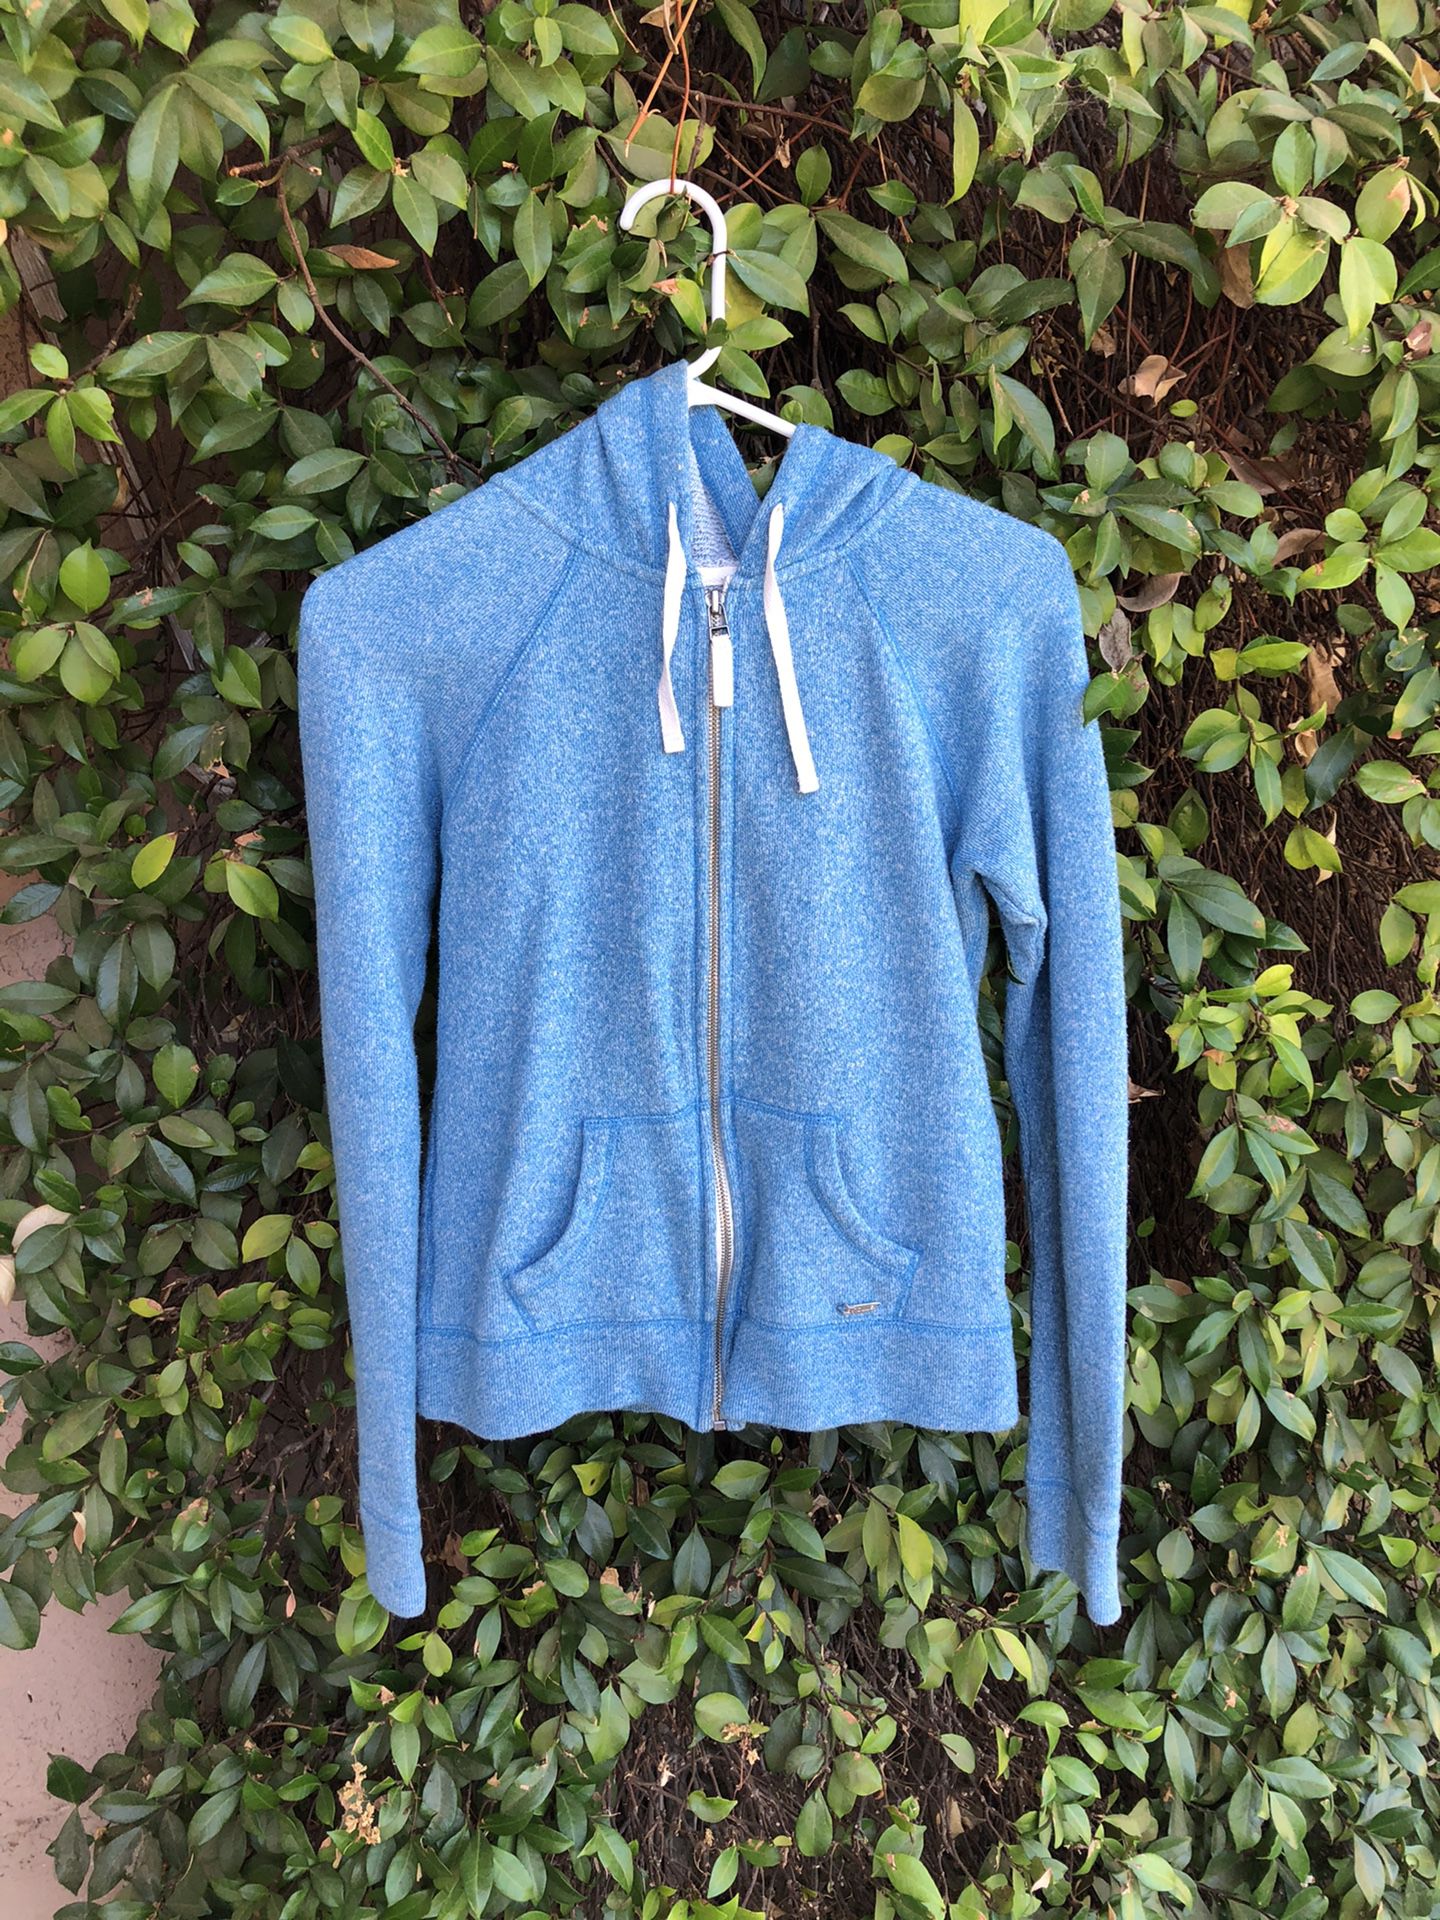 Size small blue zip up jacket